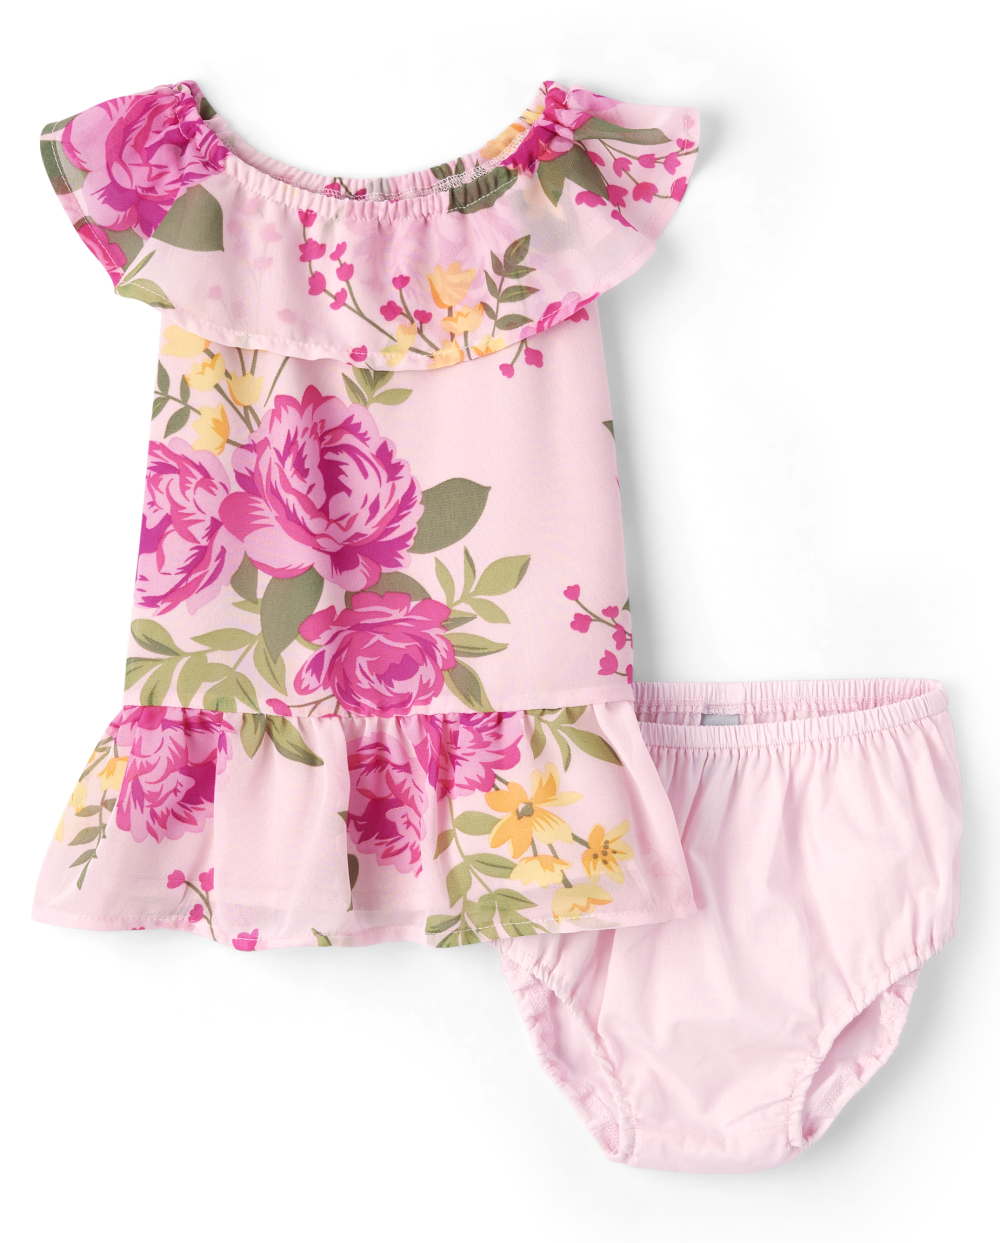 Toddler Elasticized Waistline Sleeveless Floral Print Tiered Above the Knee Dress With Ruffles